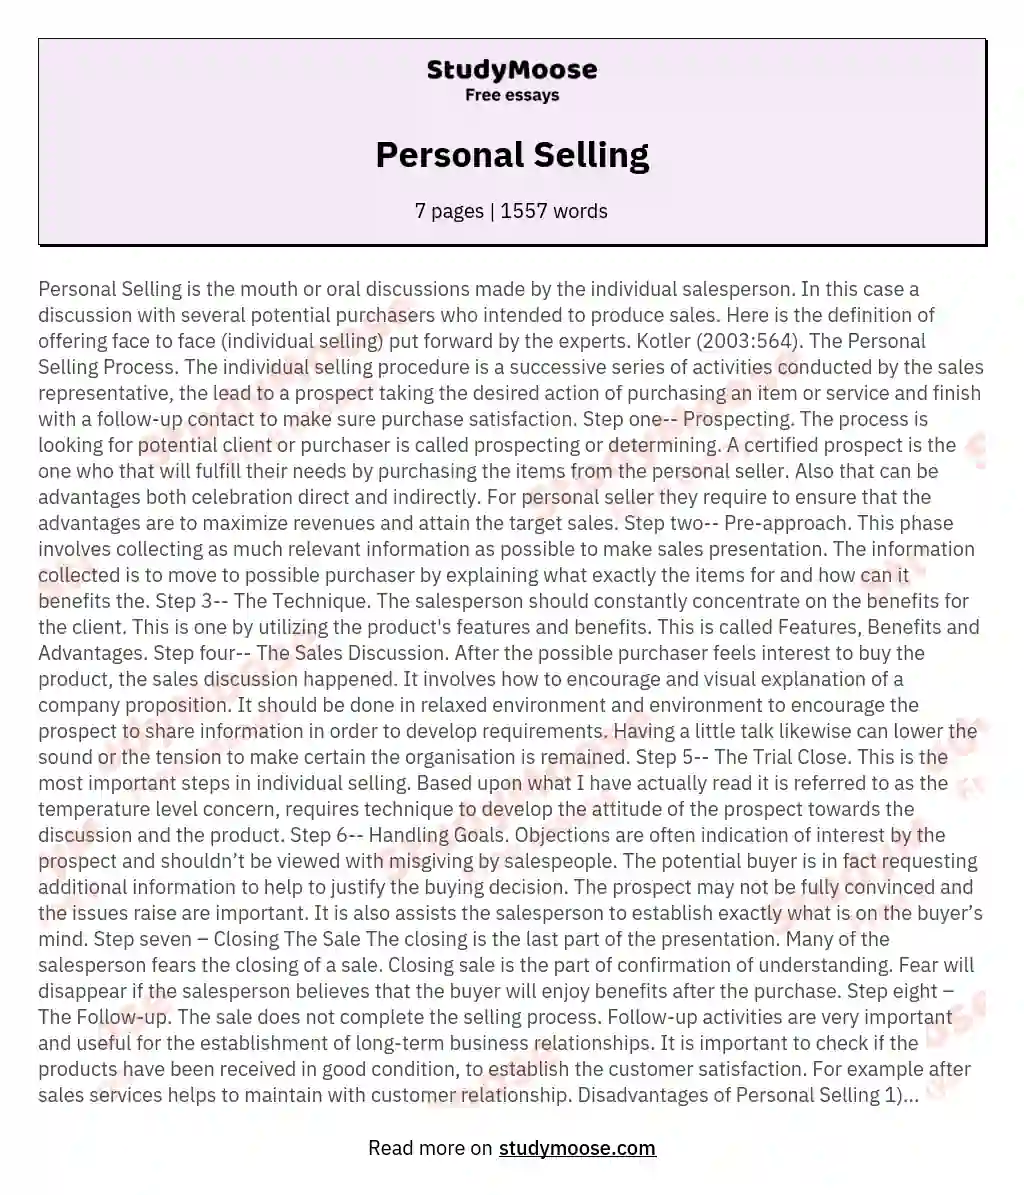 Personal Selling essay